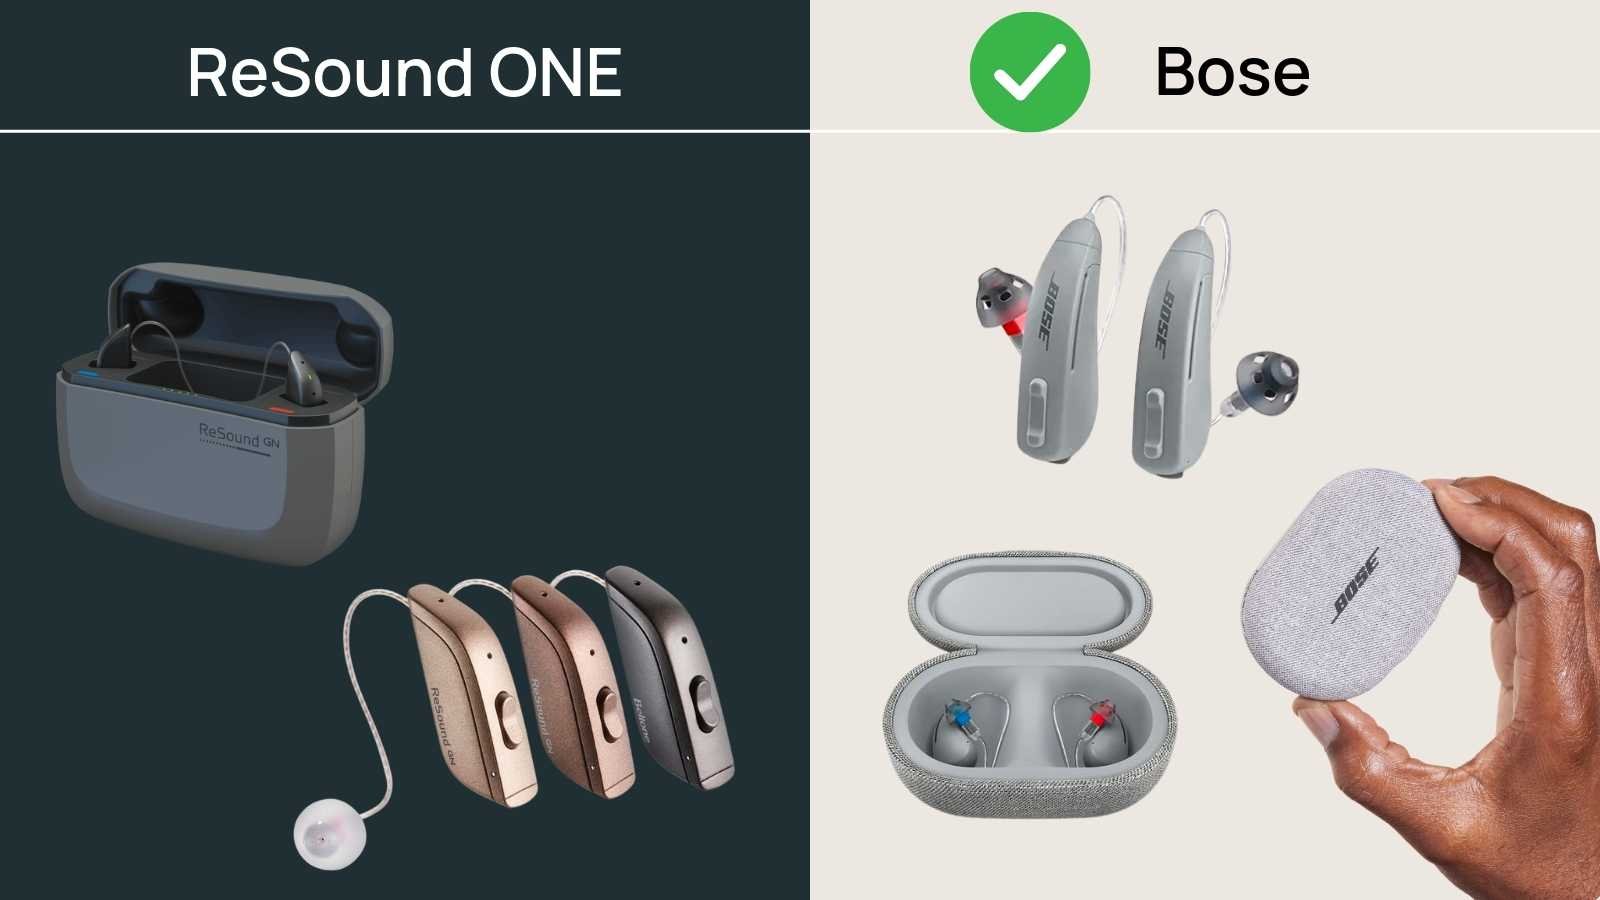 Image of Bose hearing aids side by side with ReSound ONE hearing aids